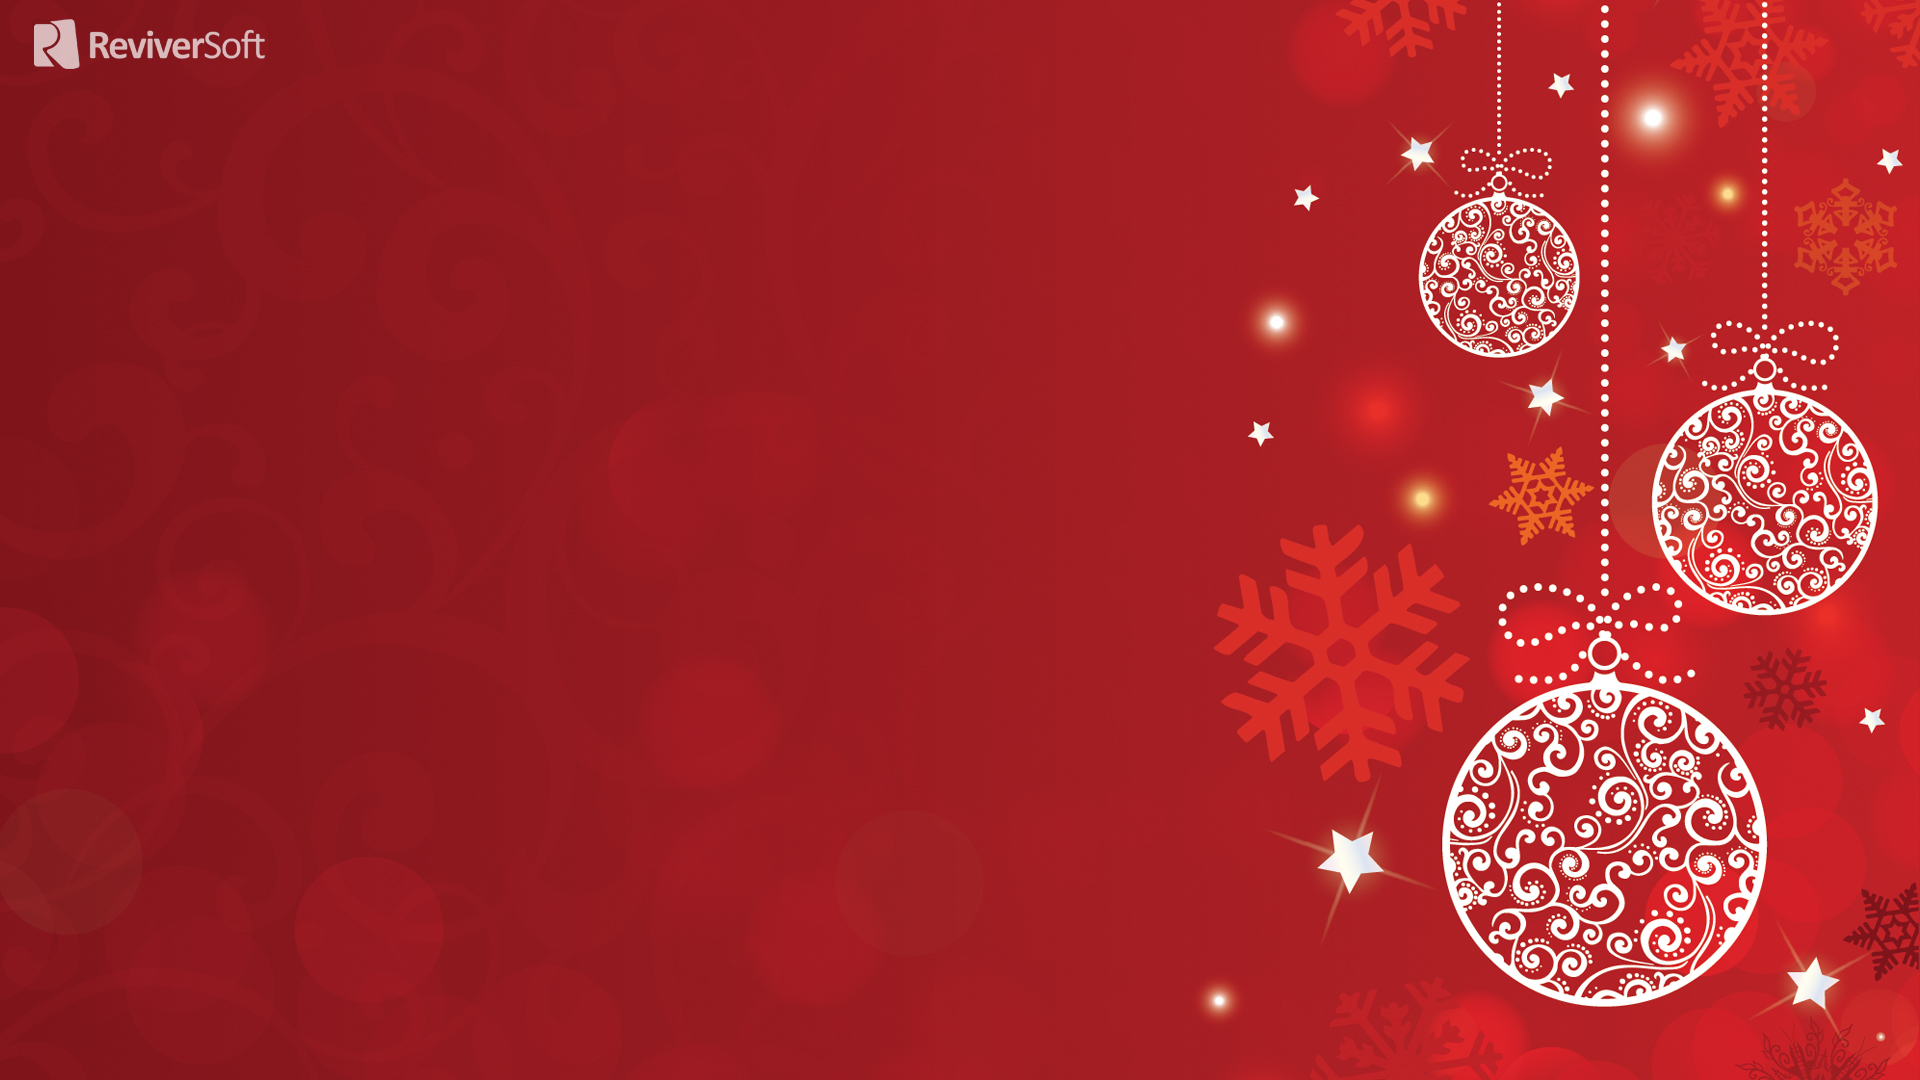 Christmas Decorations On A Red Background Wallpaper